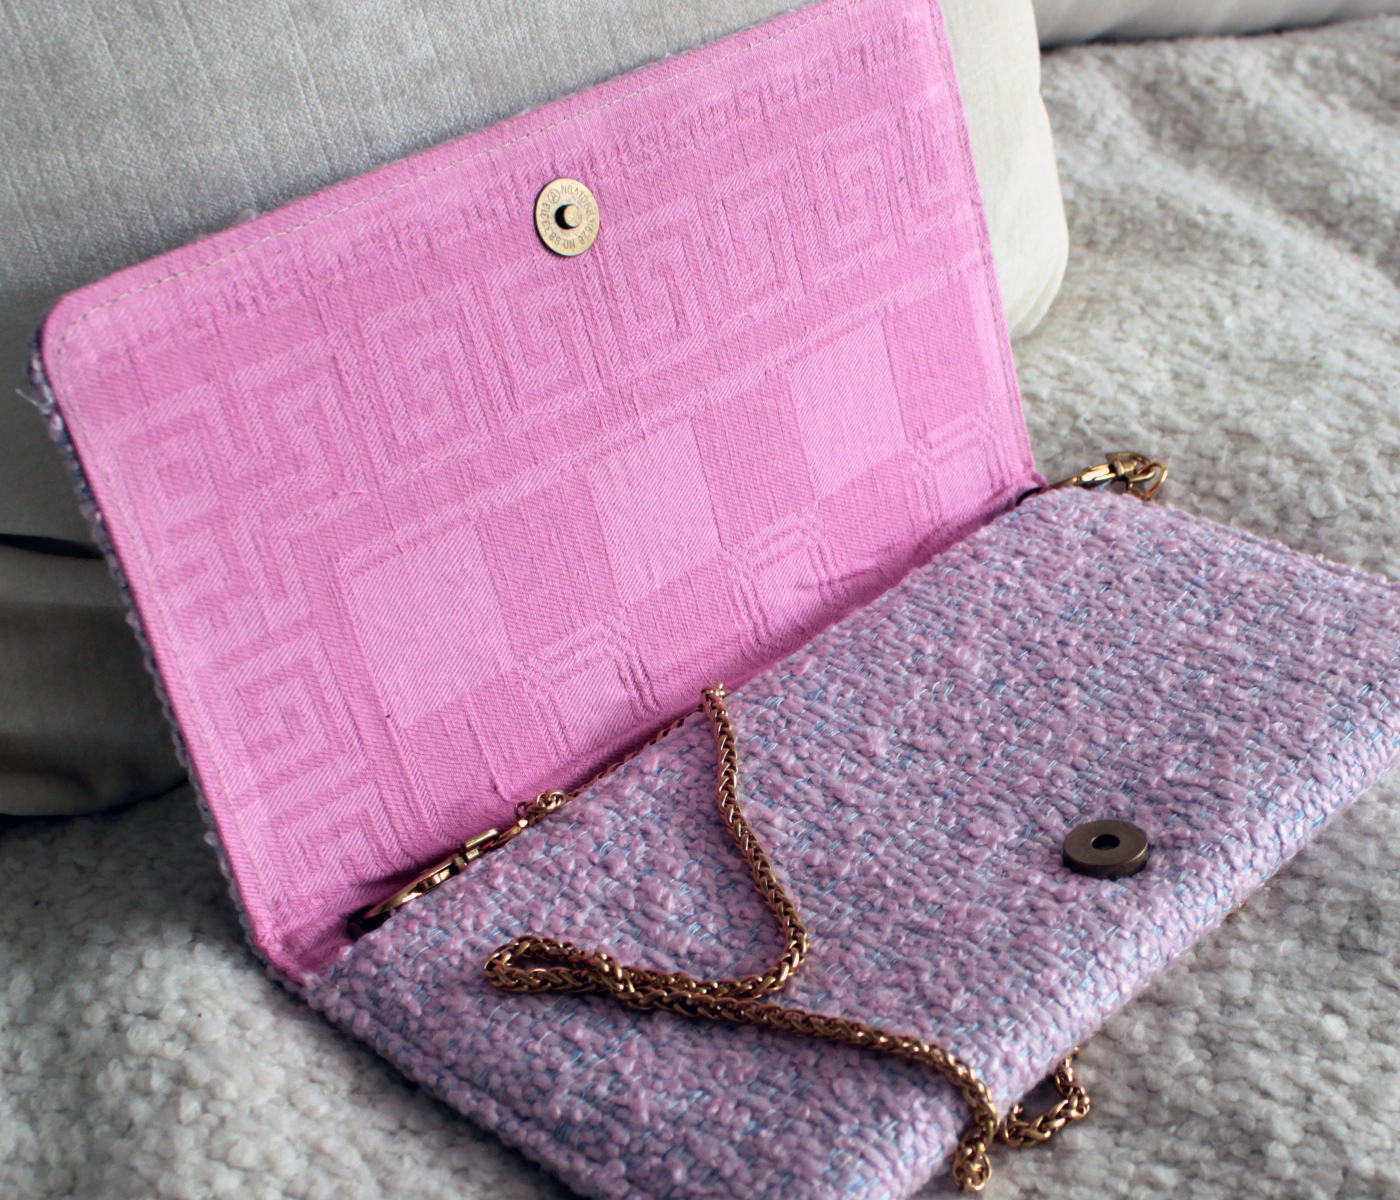 Handcrafted Lavender Wool Clutch with Vintage Embroidery Bird Design